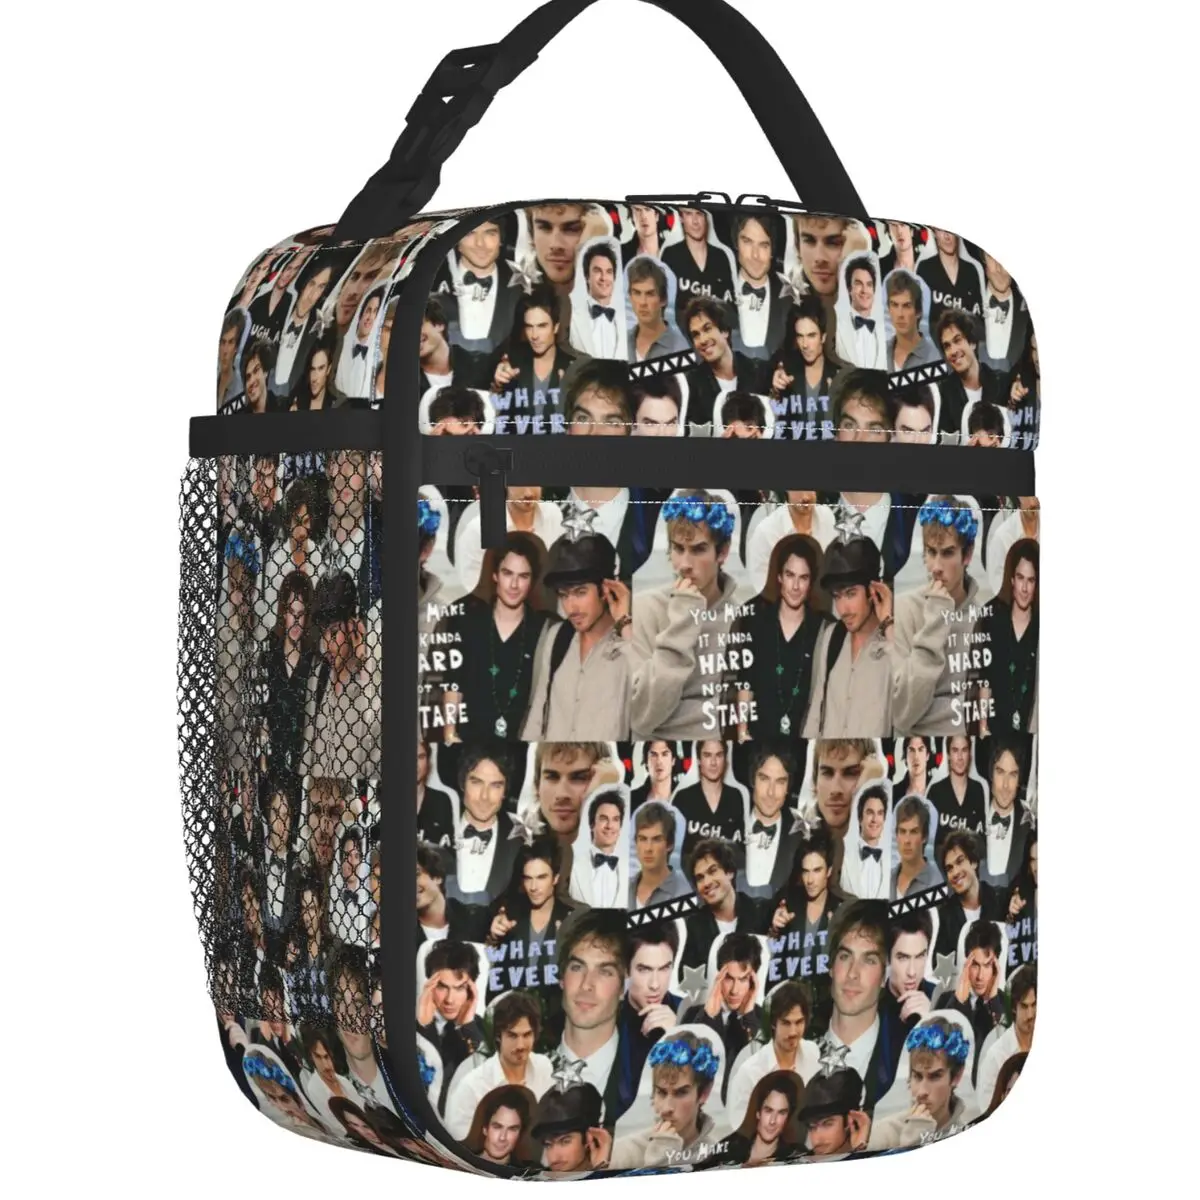 

The Vampire Diaries Damon Salvatore Collage Insulated Lunch Bag Horror TV Show Thermal Cooler Lunch Tote Office Work School